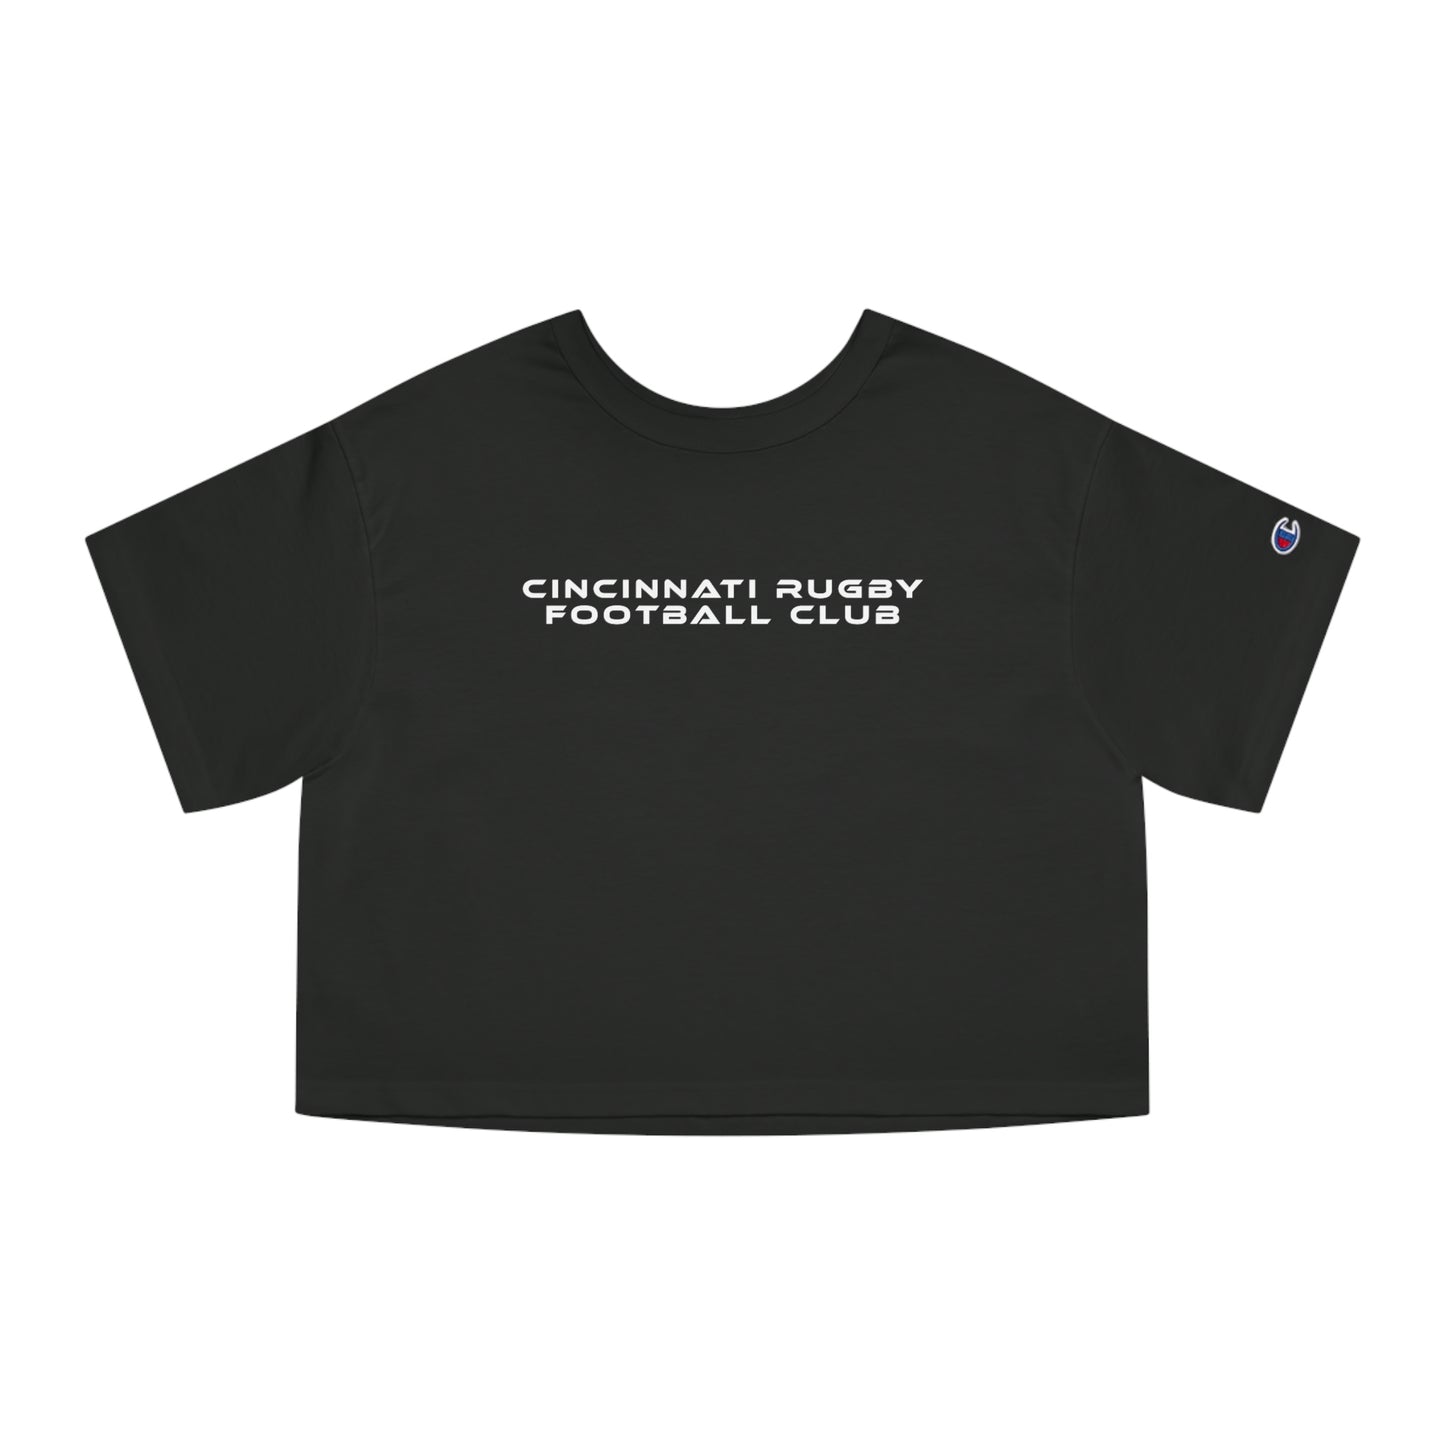 Champion Heritage Crop Top | CRFC Wolfhounds Blue Crest